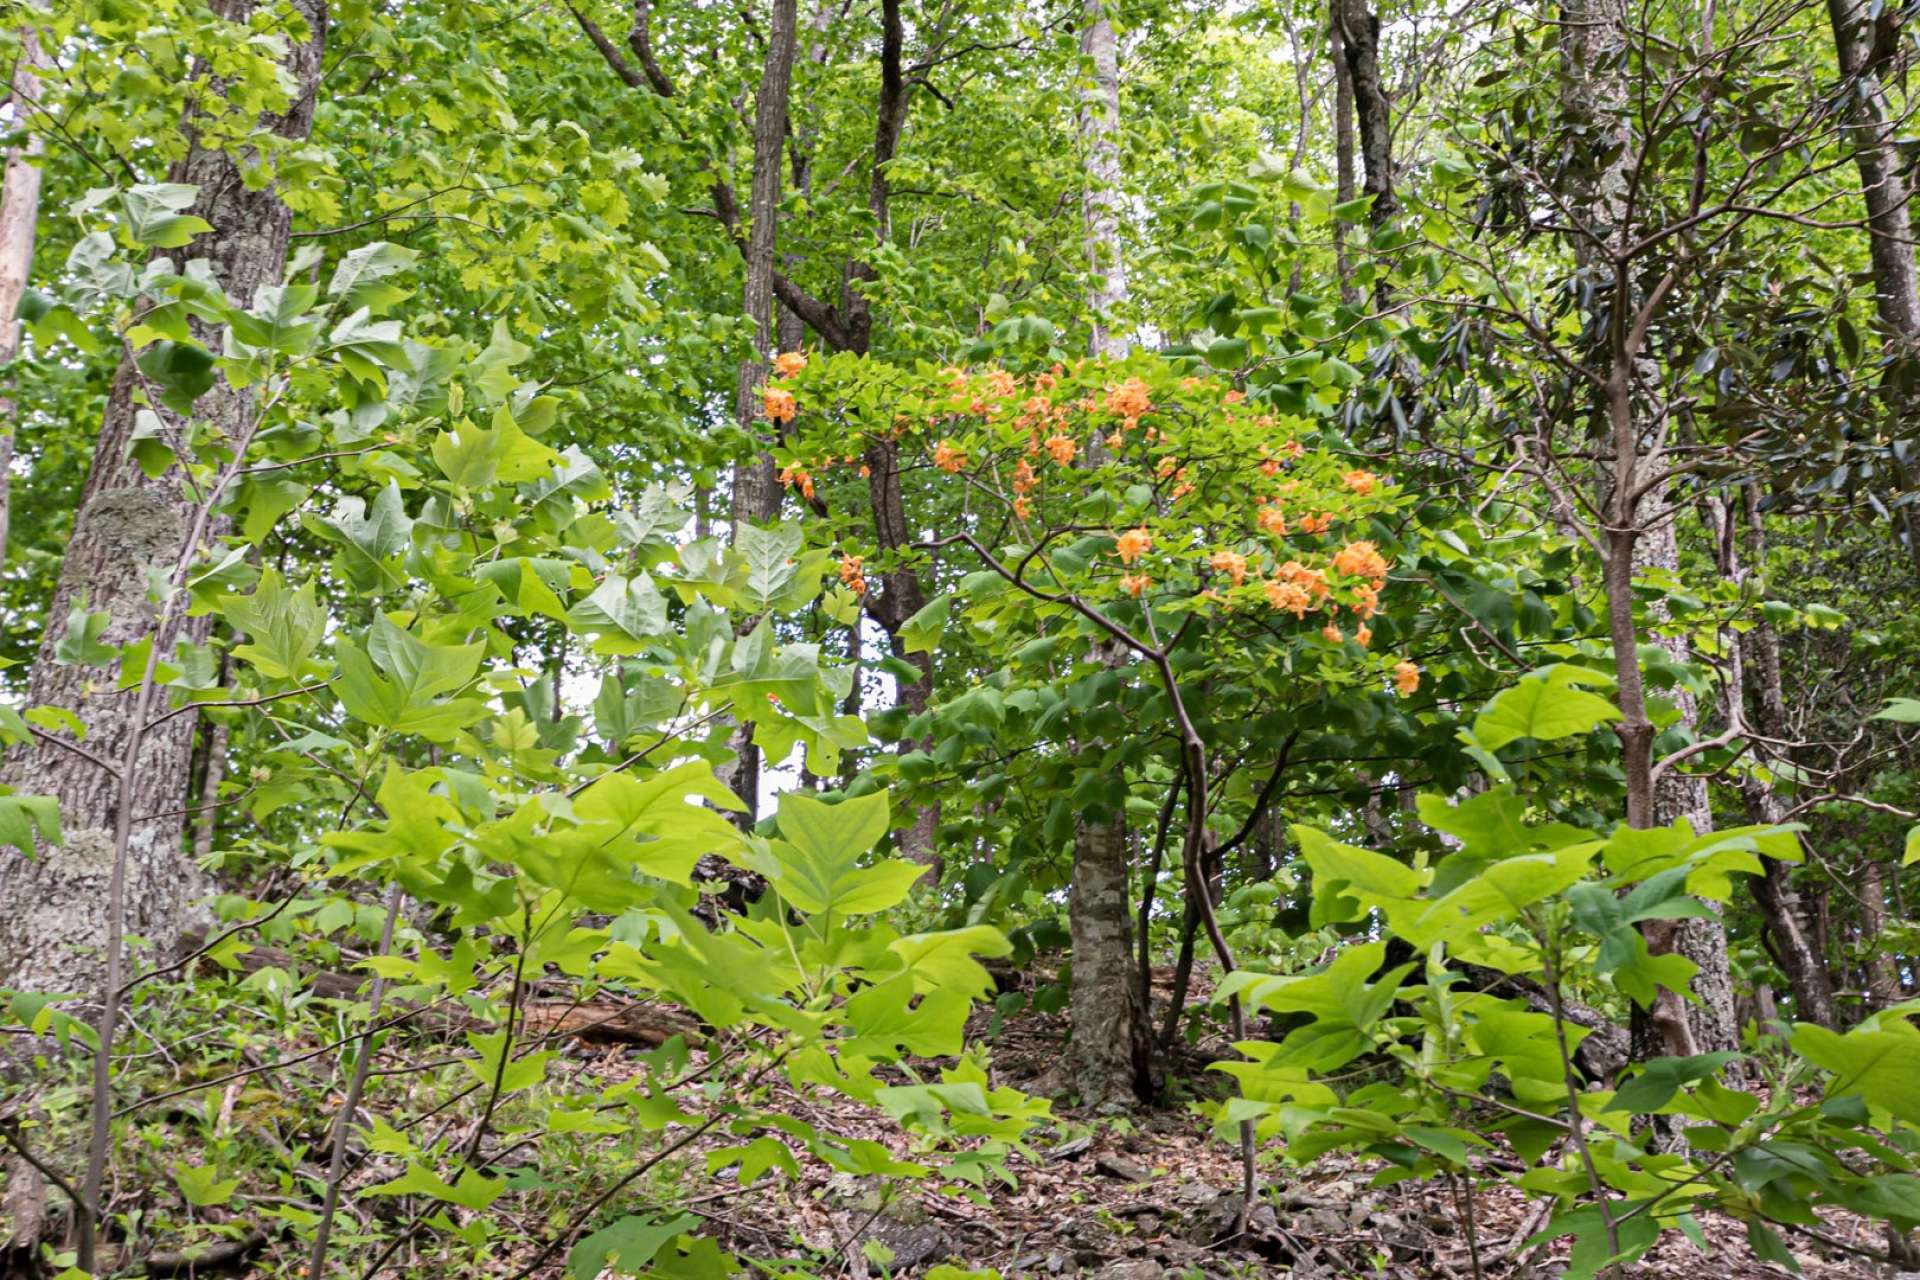 The terrain is mixed with several varieties of mountain foliage such as flame azalea, trillium, and other native mountain wildflowers.